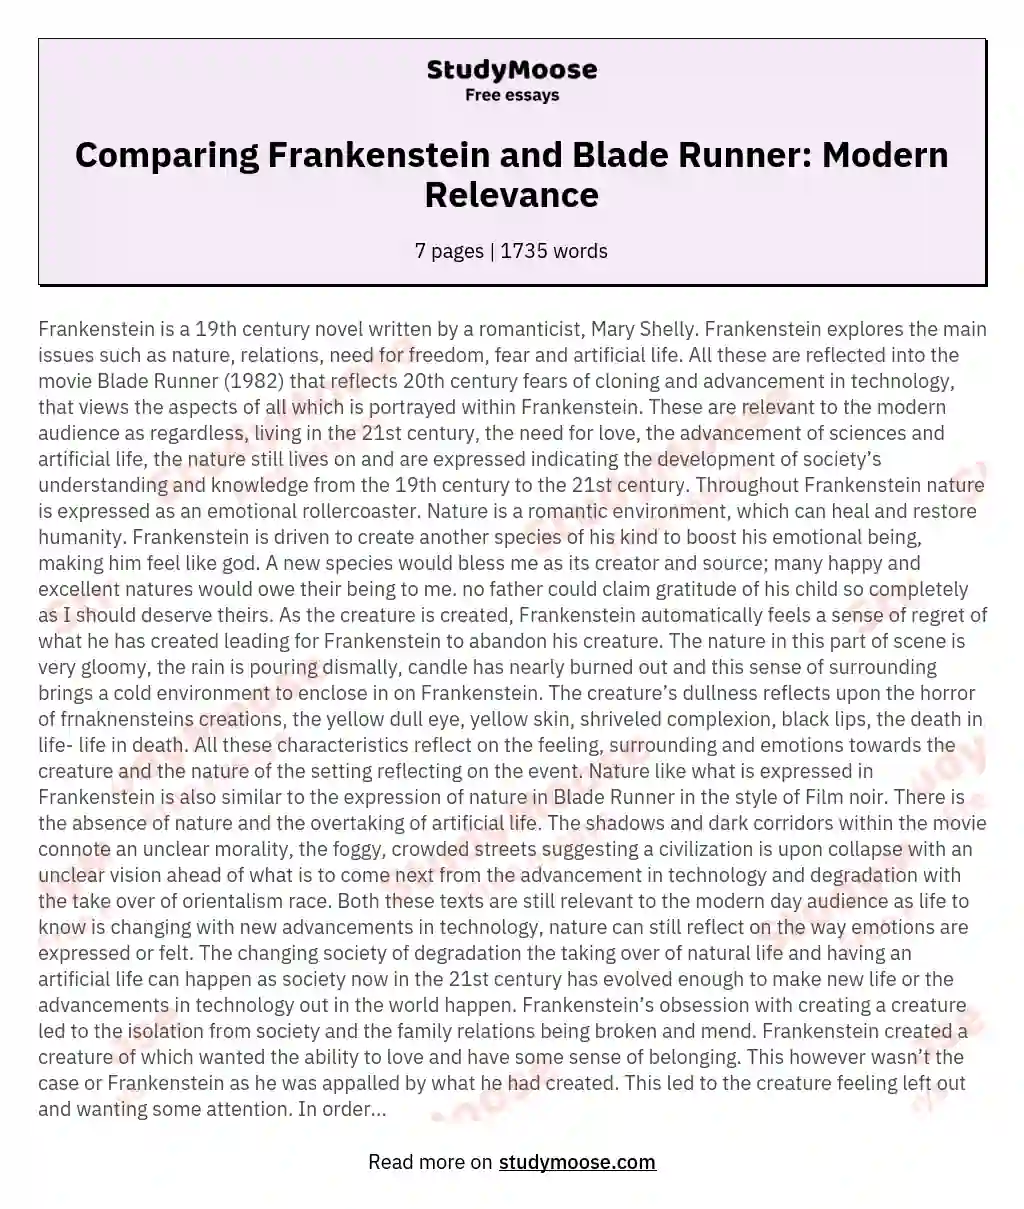 How Does Comparative Study of Frankenstein and Blade Runner Make the Issues Raised in Frankenstein Relevant to Modern Audience?